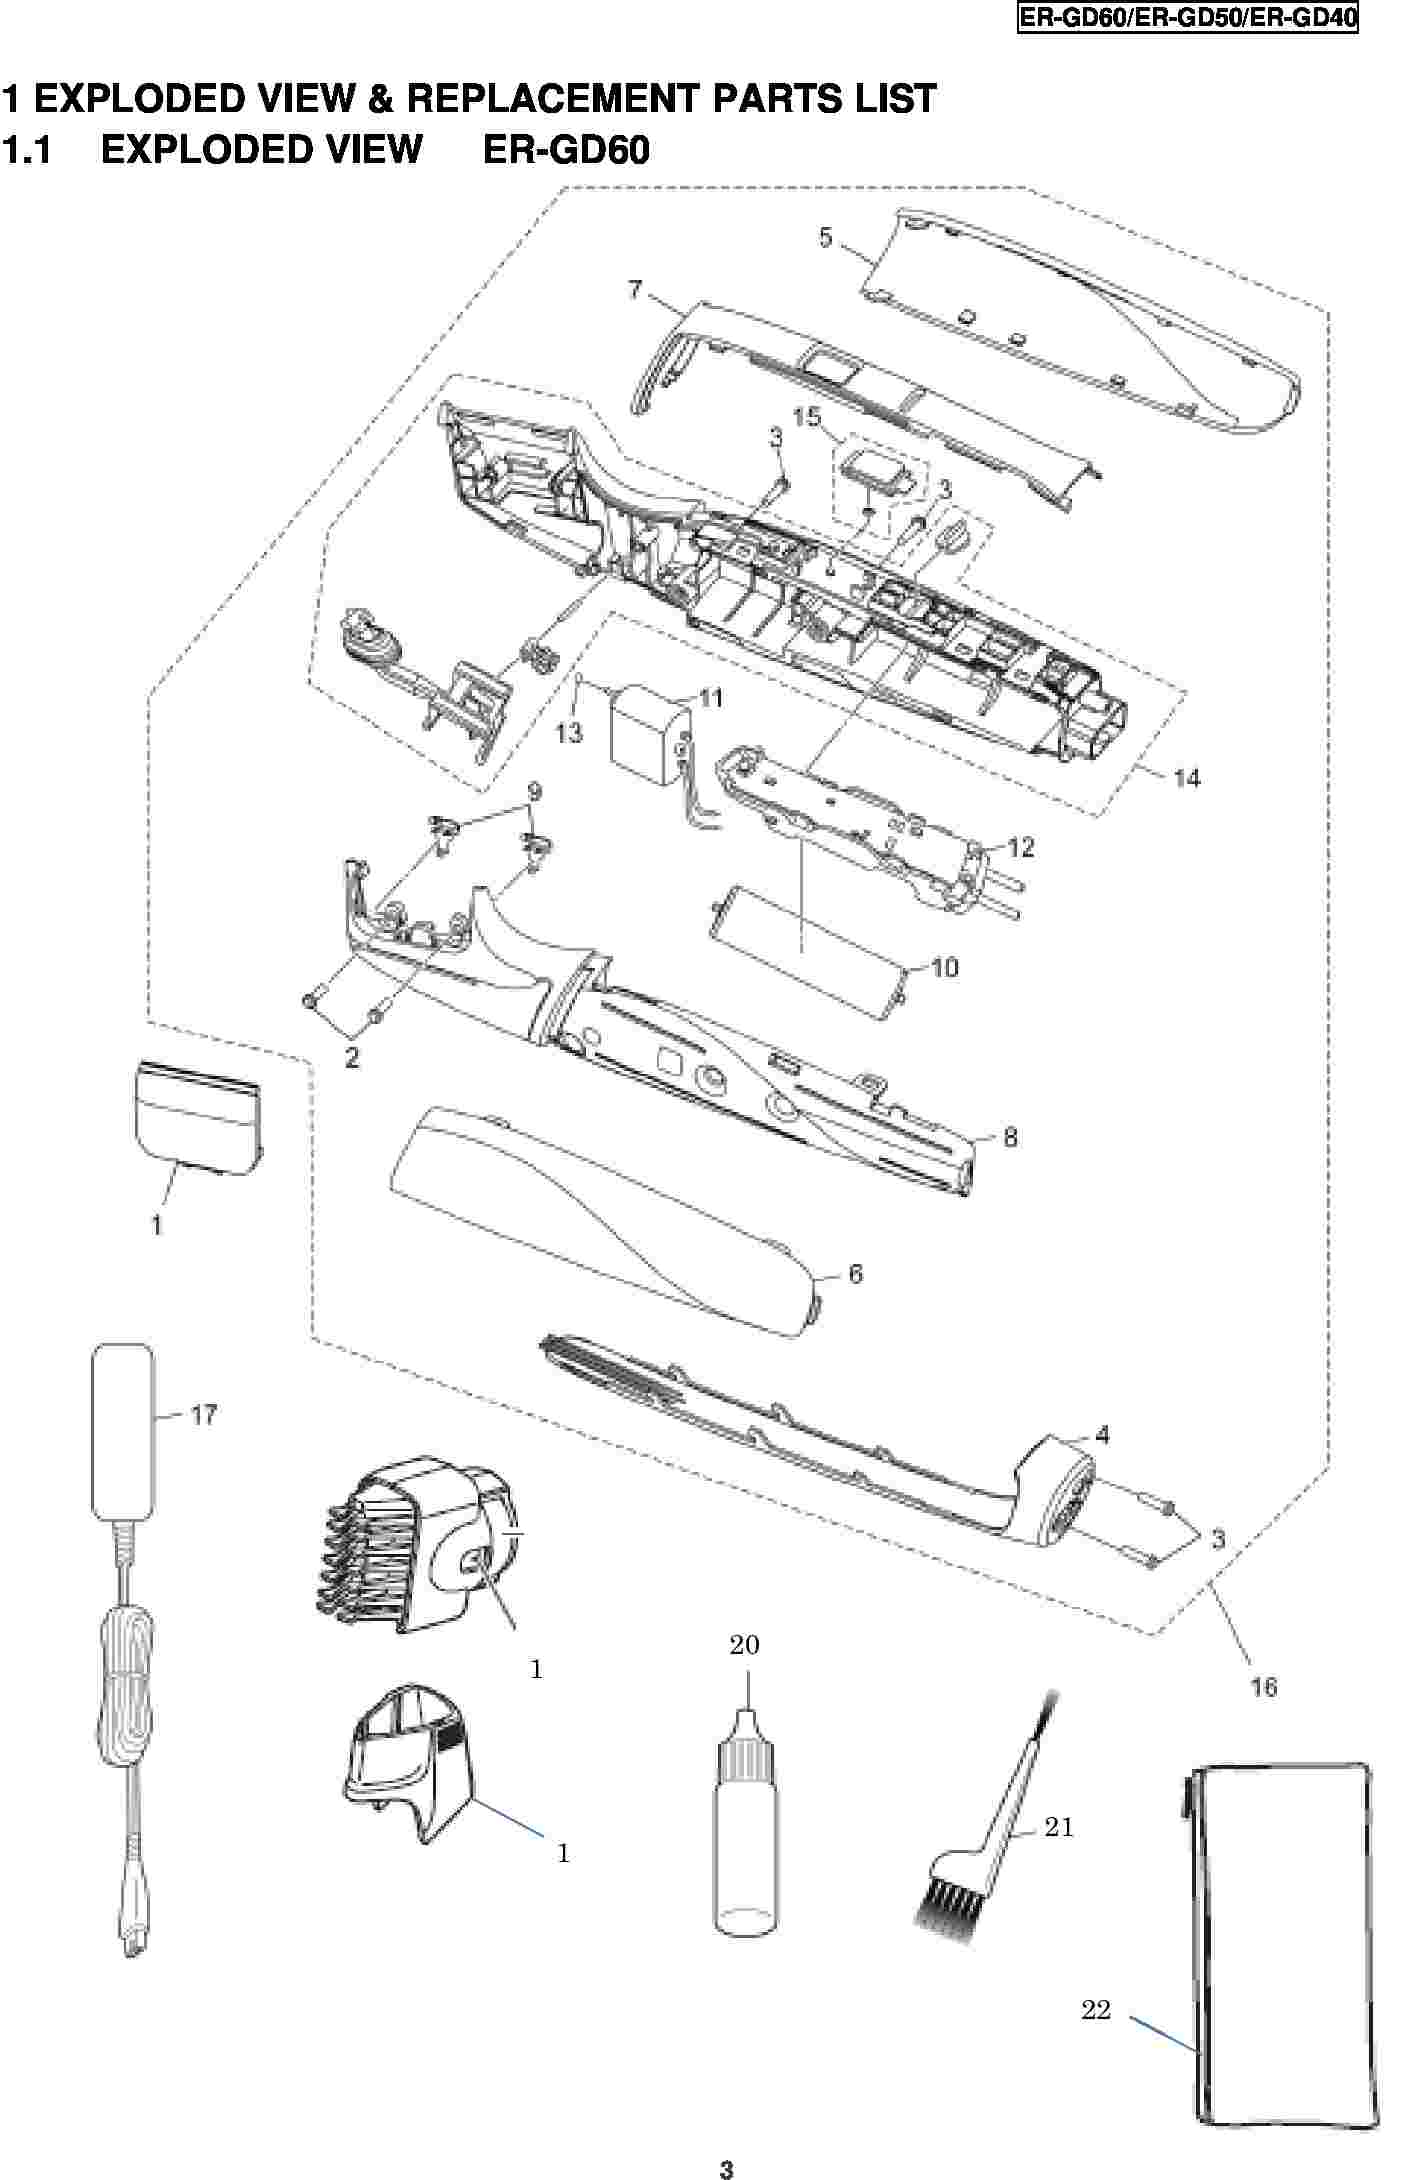 ER-GD60: Exploded View